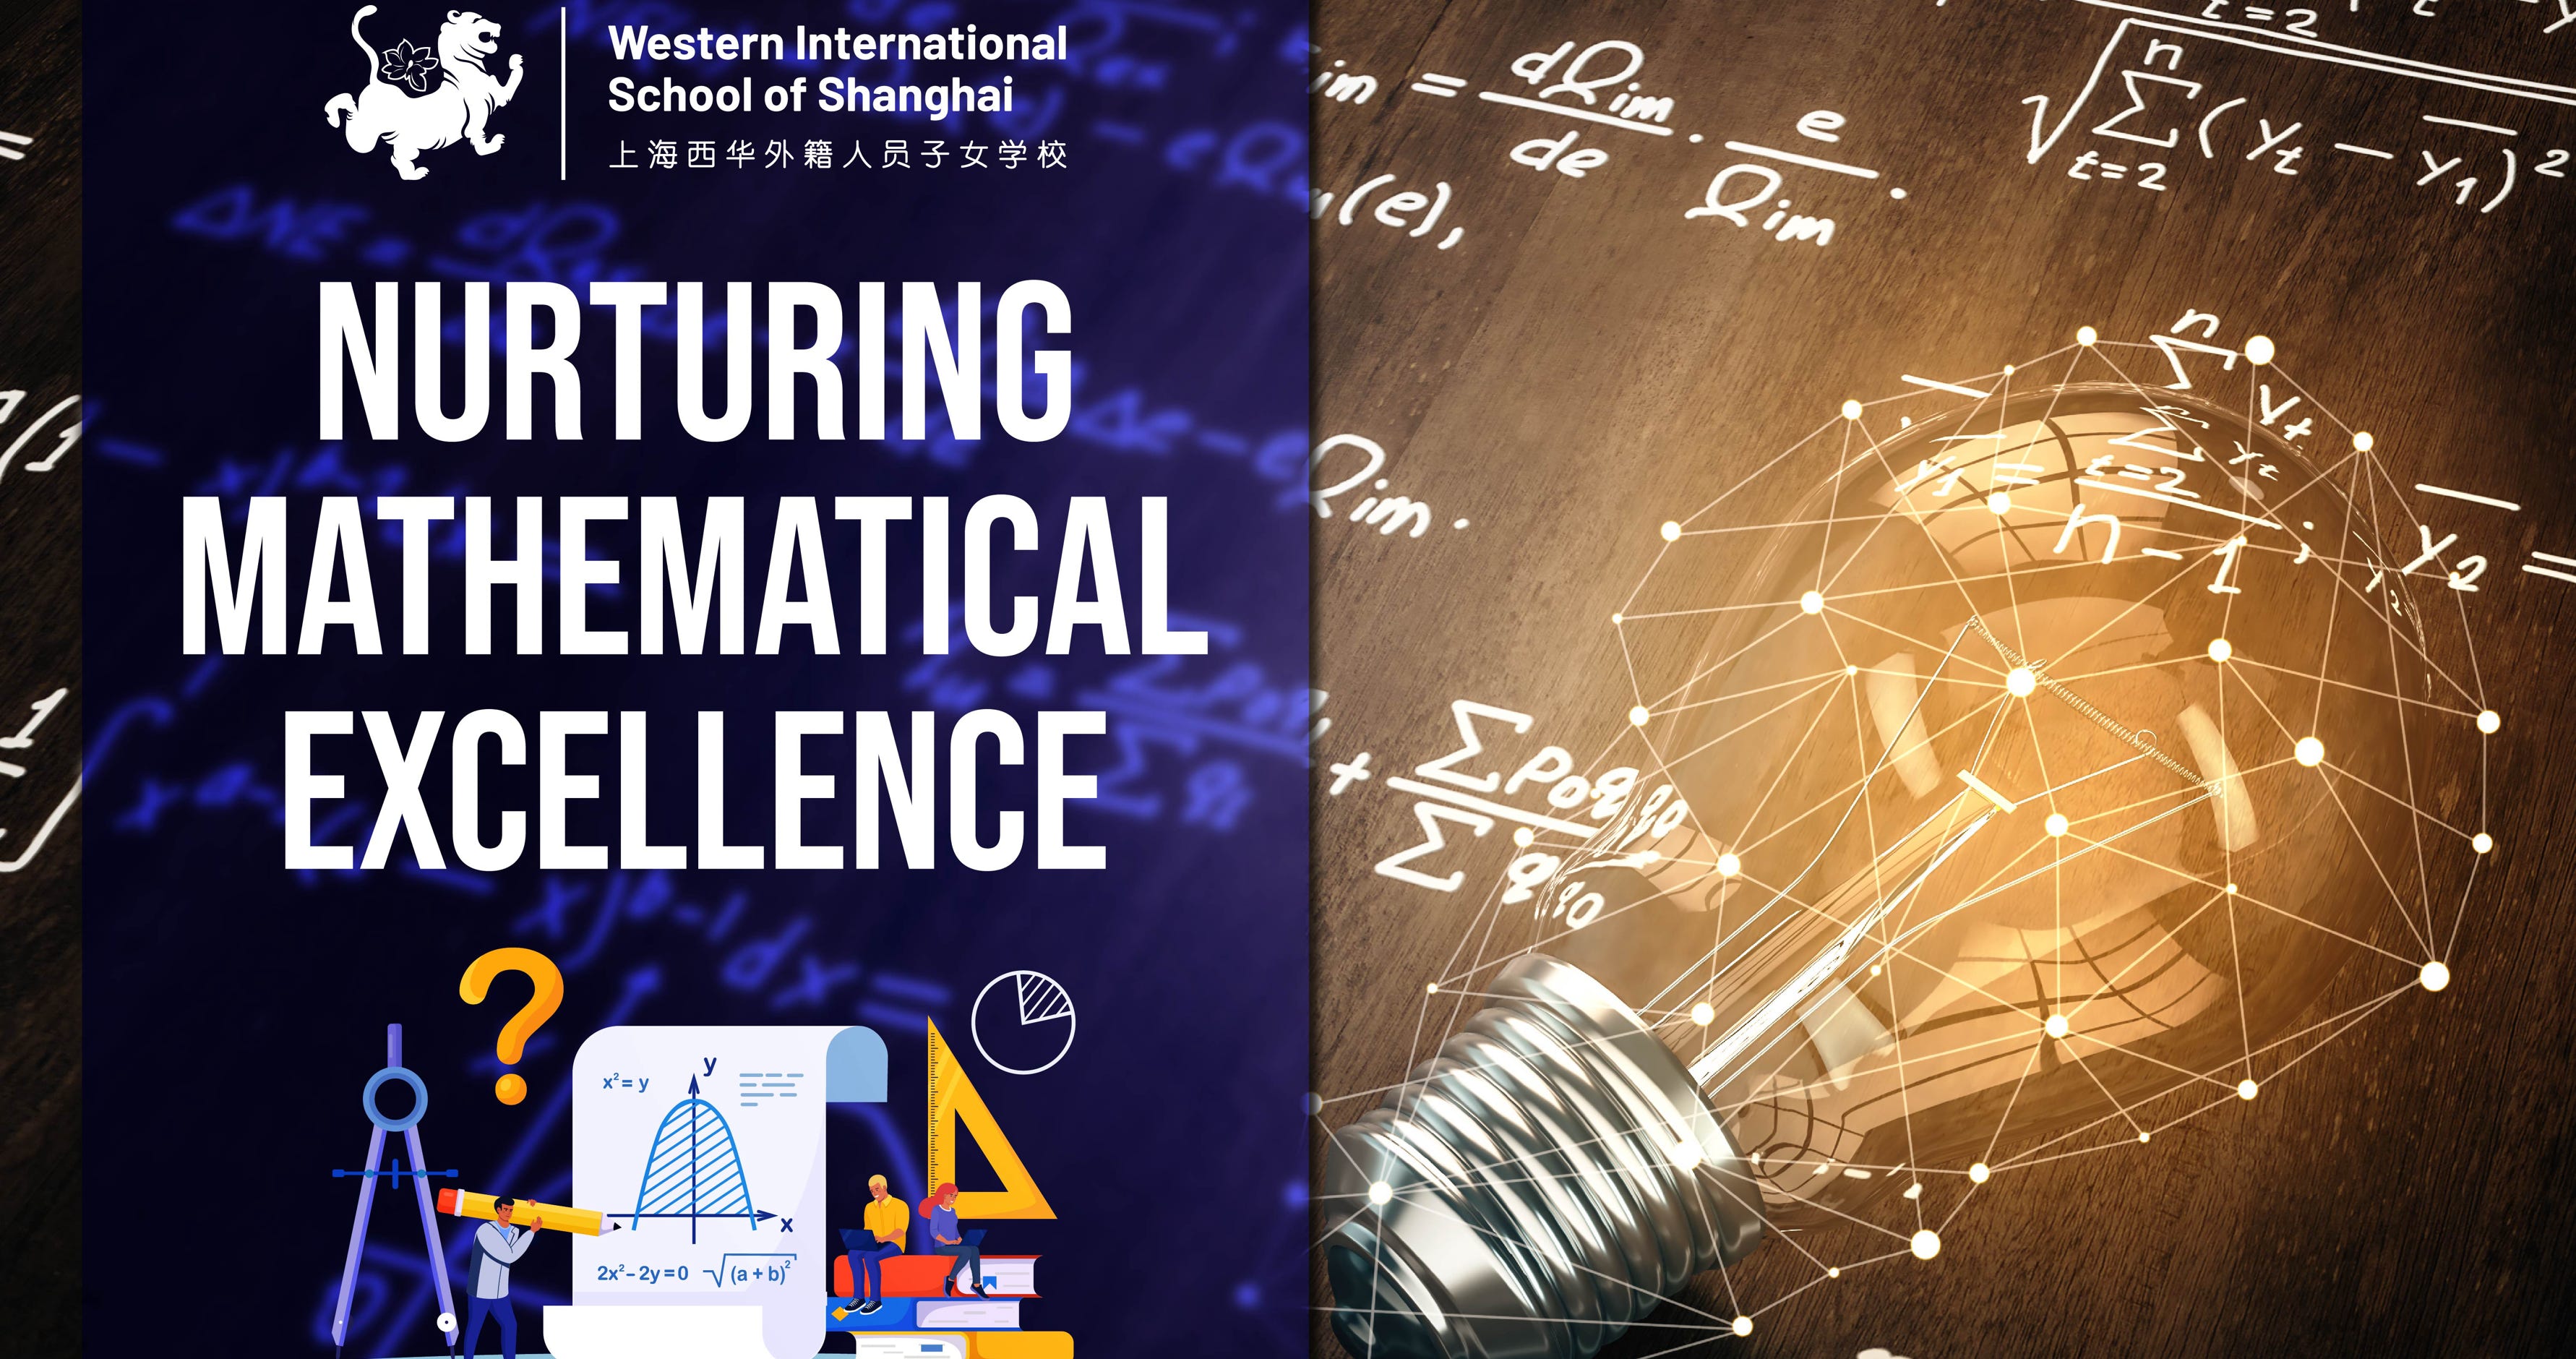 Mathematics is not only a subject that challenges and fascinates students but also one that can define their academic journey. At the Western International School of Shanghai (WISS), we are committed to nurturing the mathematical potential of every child, empowering them to achieve excellence in this critical field. Our dedicated and experienced teachers have developed a comprehensive pathway that highlights the strategies and resources available at WISS to foster mathematical excellence and cultivate a true love for mathematics. Join us as we delve into the remarkable support system spanning from the Early Years through Primary, Secondary, and beyond. Through engagement, we aim to provide an immersive understanding of how our programmes and methodologies align with our mission to nurture mathematical excellence in every student.